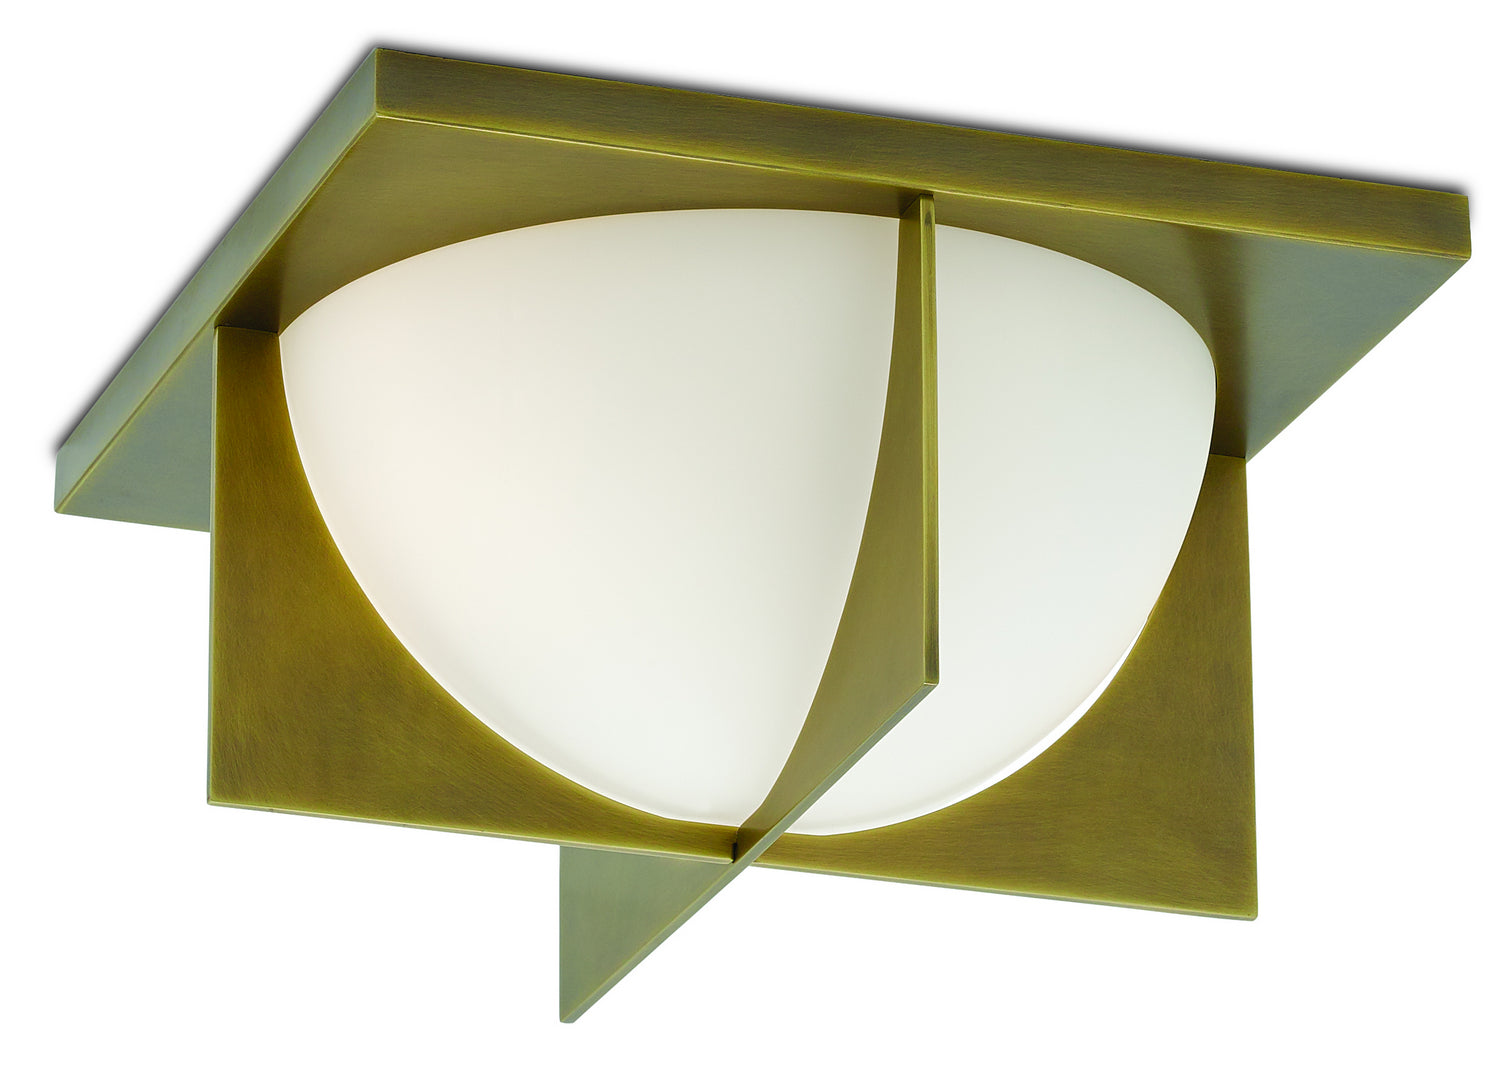 Two Light Flush Mount from the Lucas collection in Antique Brass finish